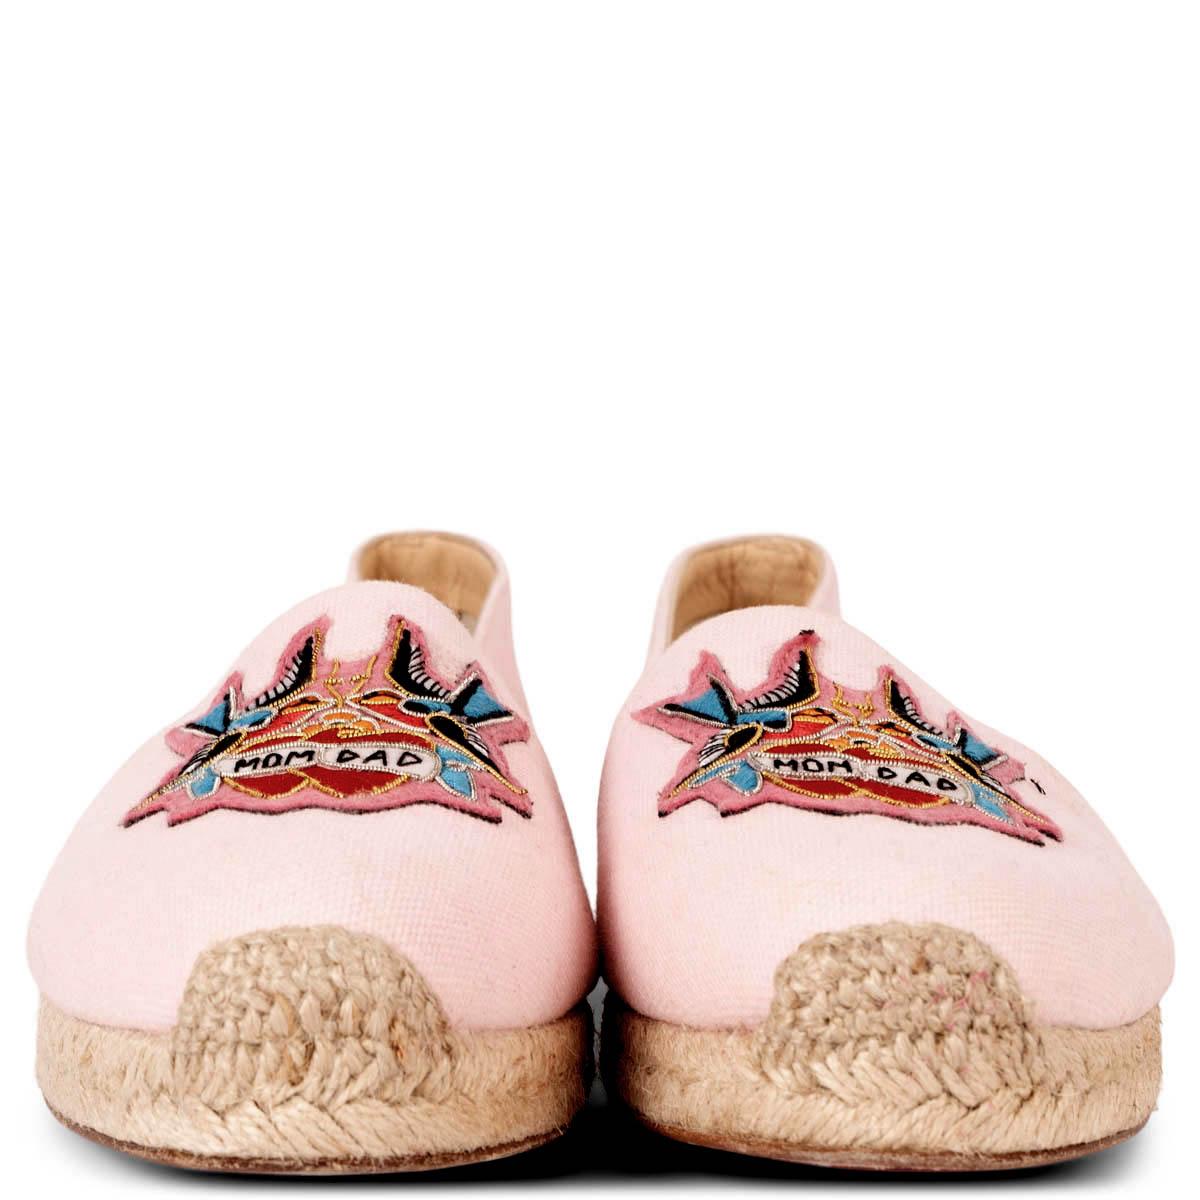 100% authentic Christian Louboutin Mom & Dad espadrille flats in pink canvas  embellished with multicolor patch. Have been worn and are in excellent condition. 

Measurements
Imprinted Size	39
Shoe Size	38.5
Inside Sole	25.5cm (9.9in)
Width	7.5cm